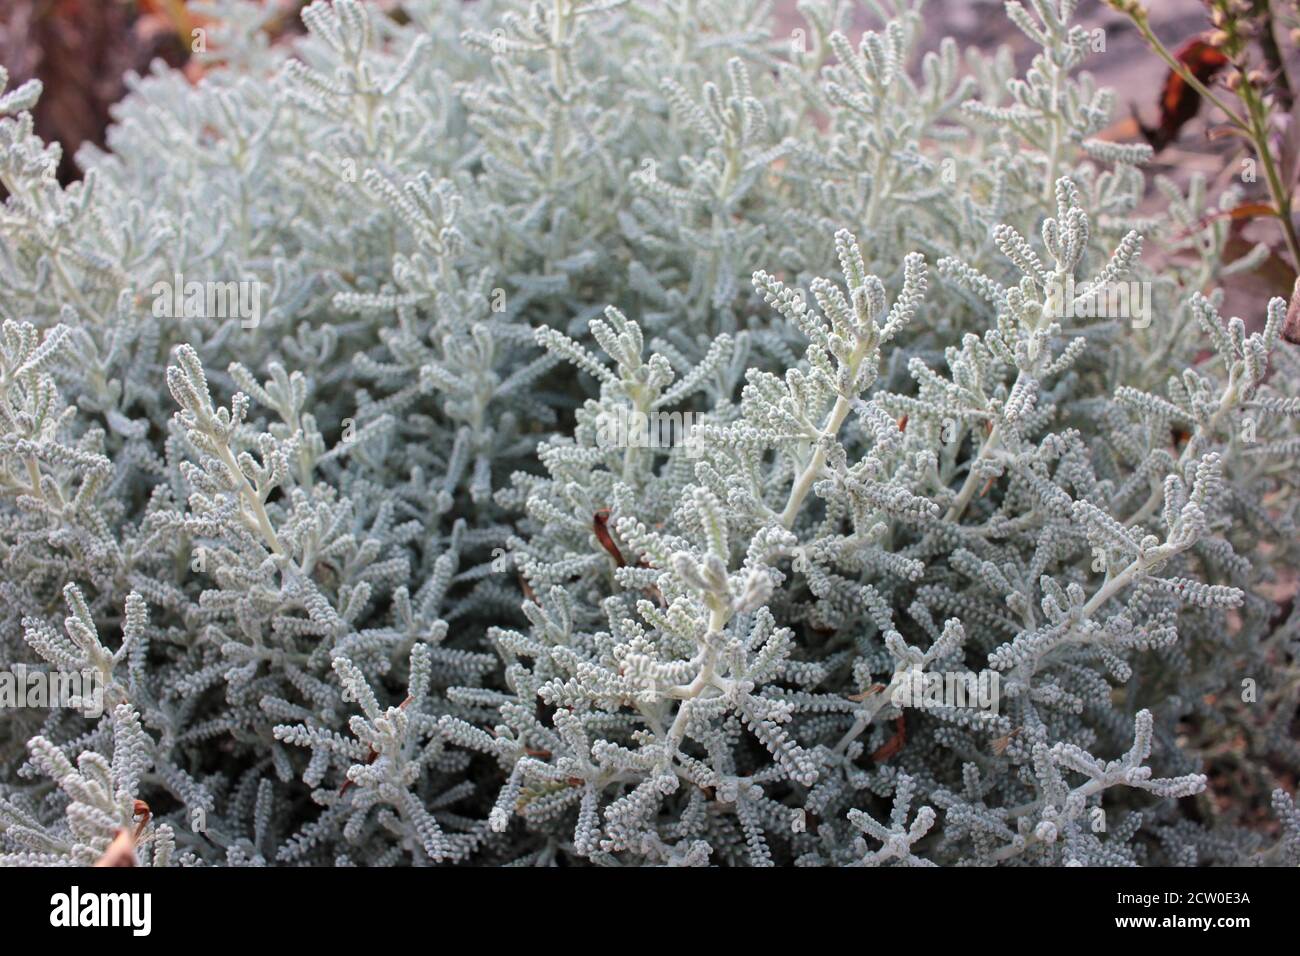 Santolina chamaecyparissus or Lavender Cotton with silver-gray foliage growing in the autumn garden. Stock Photo